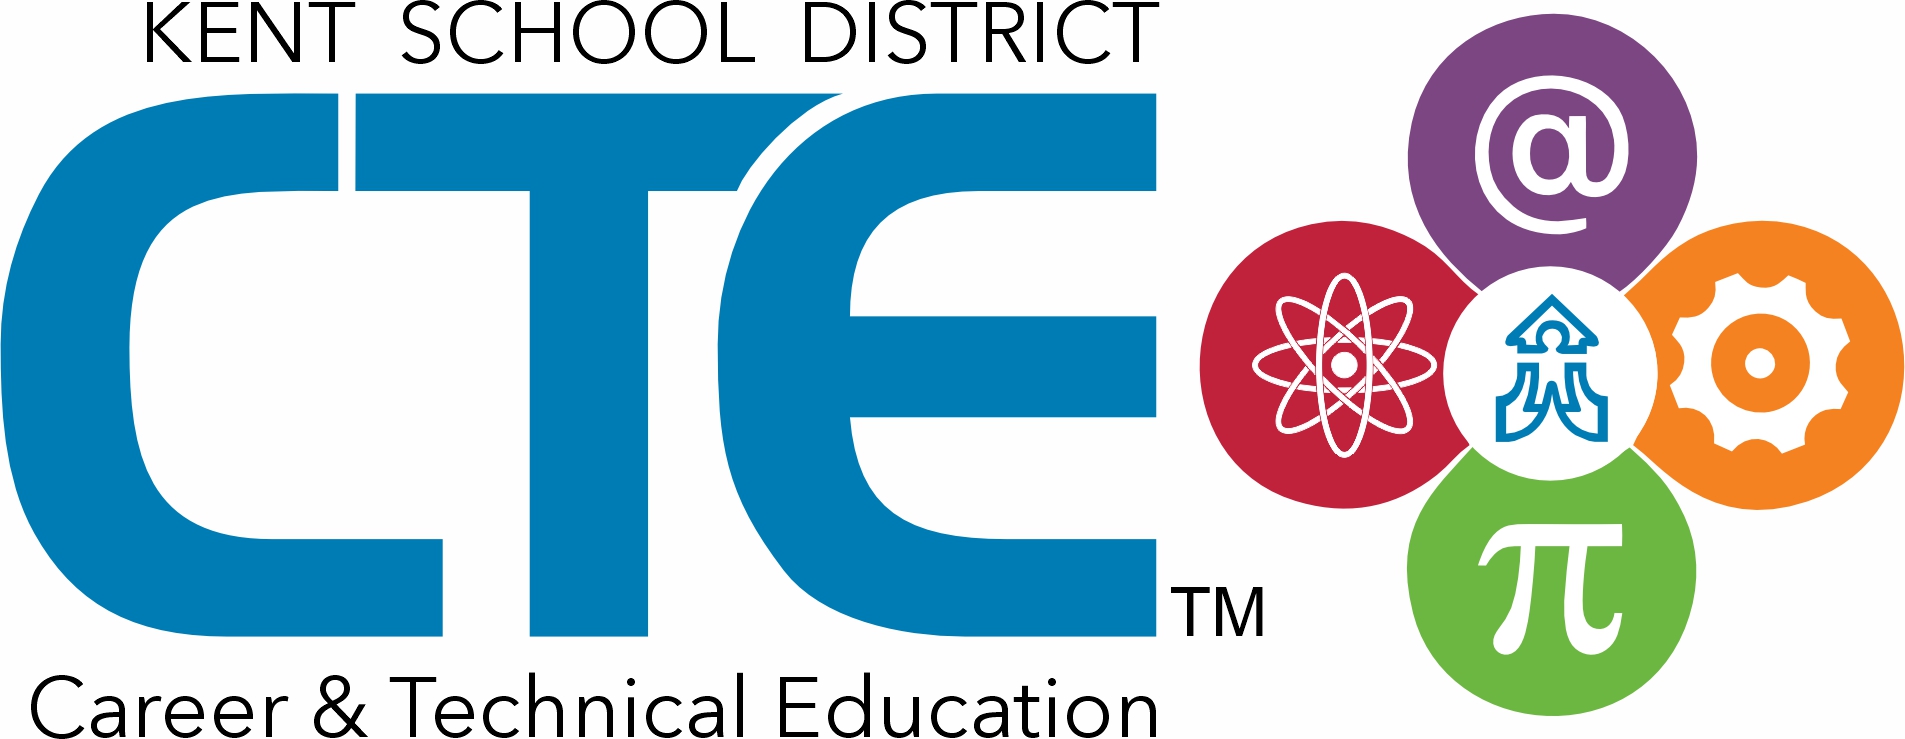 Kent School District Career and Technical Education